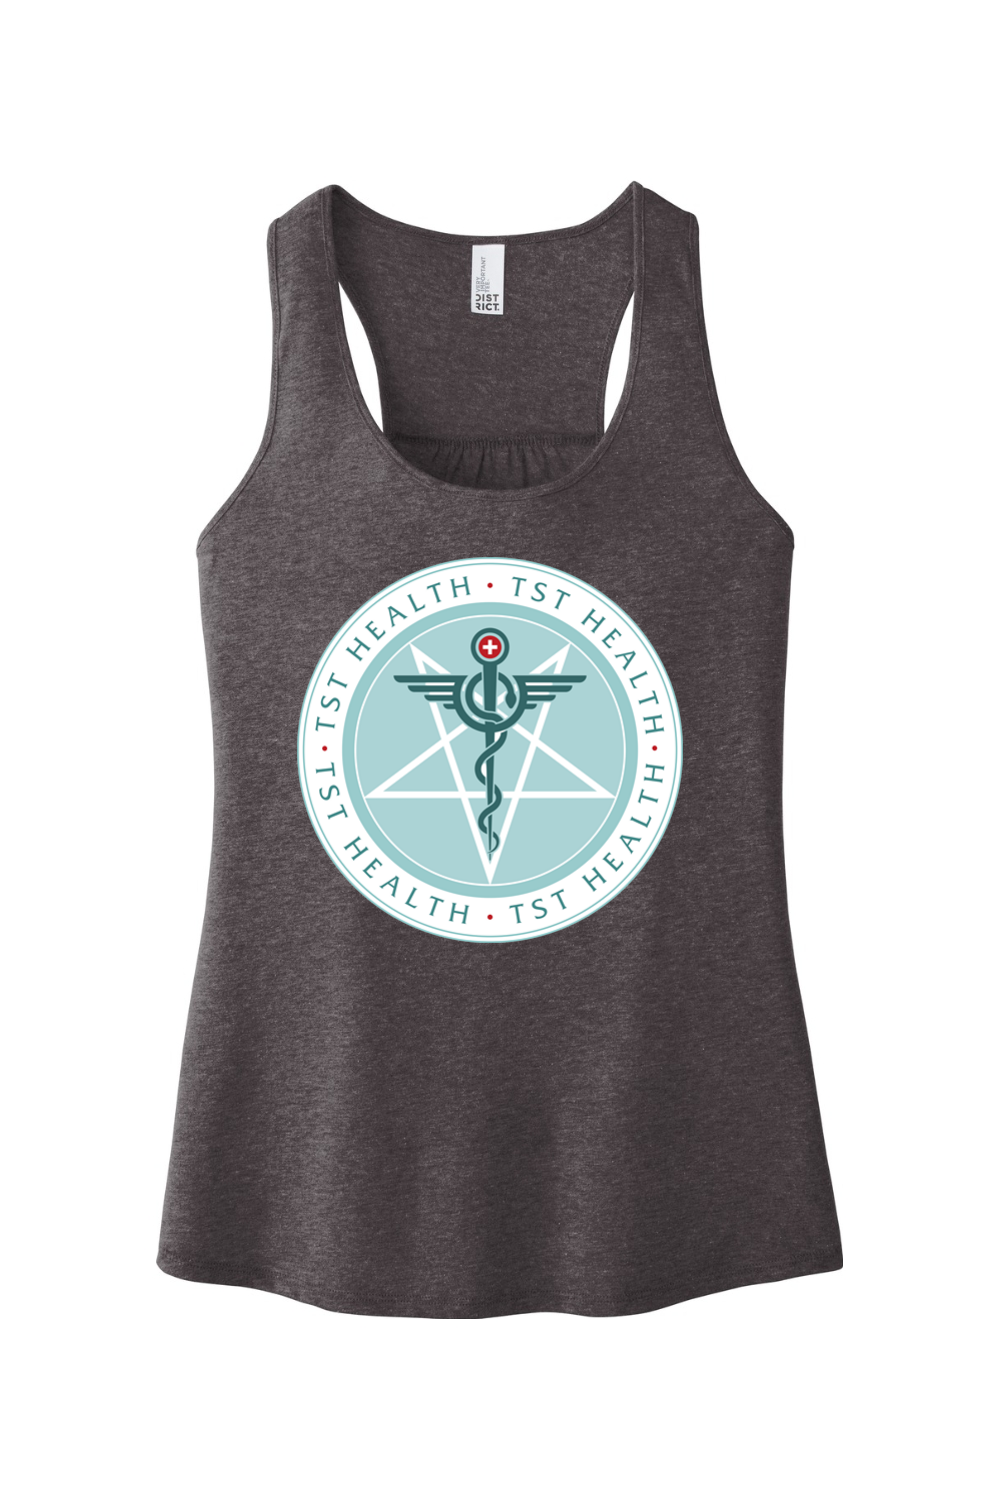 TST Health Fitted Tank